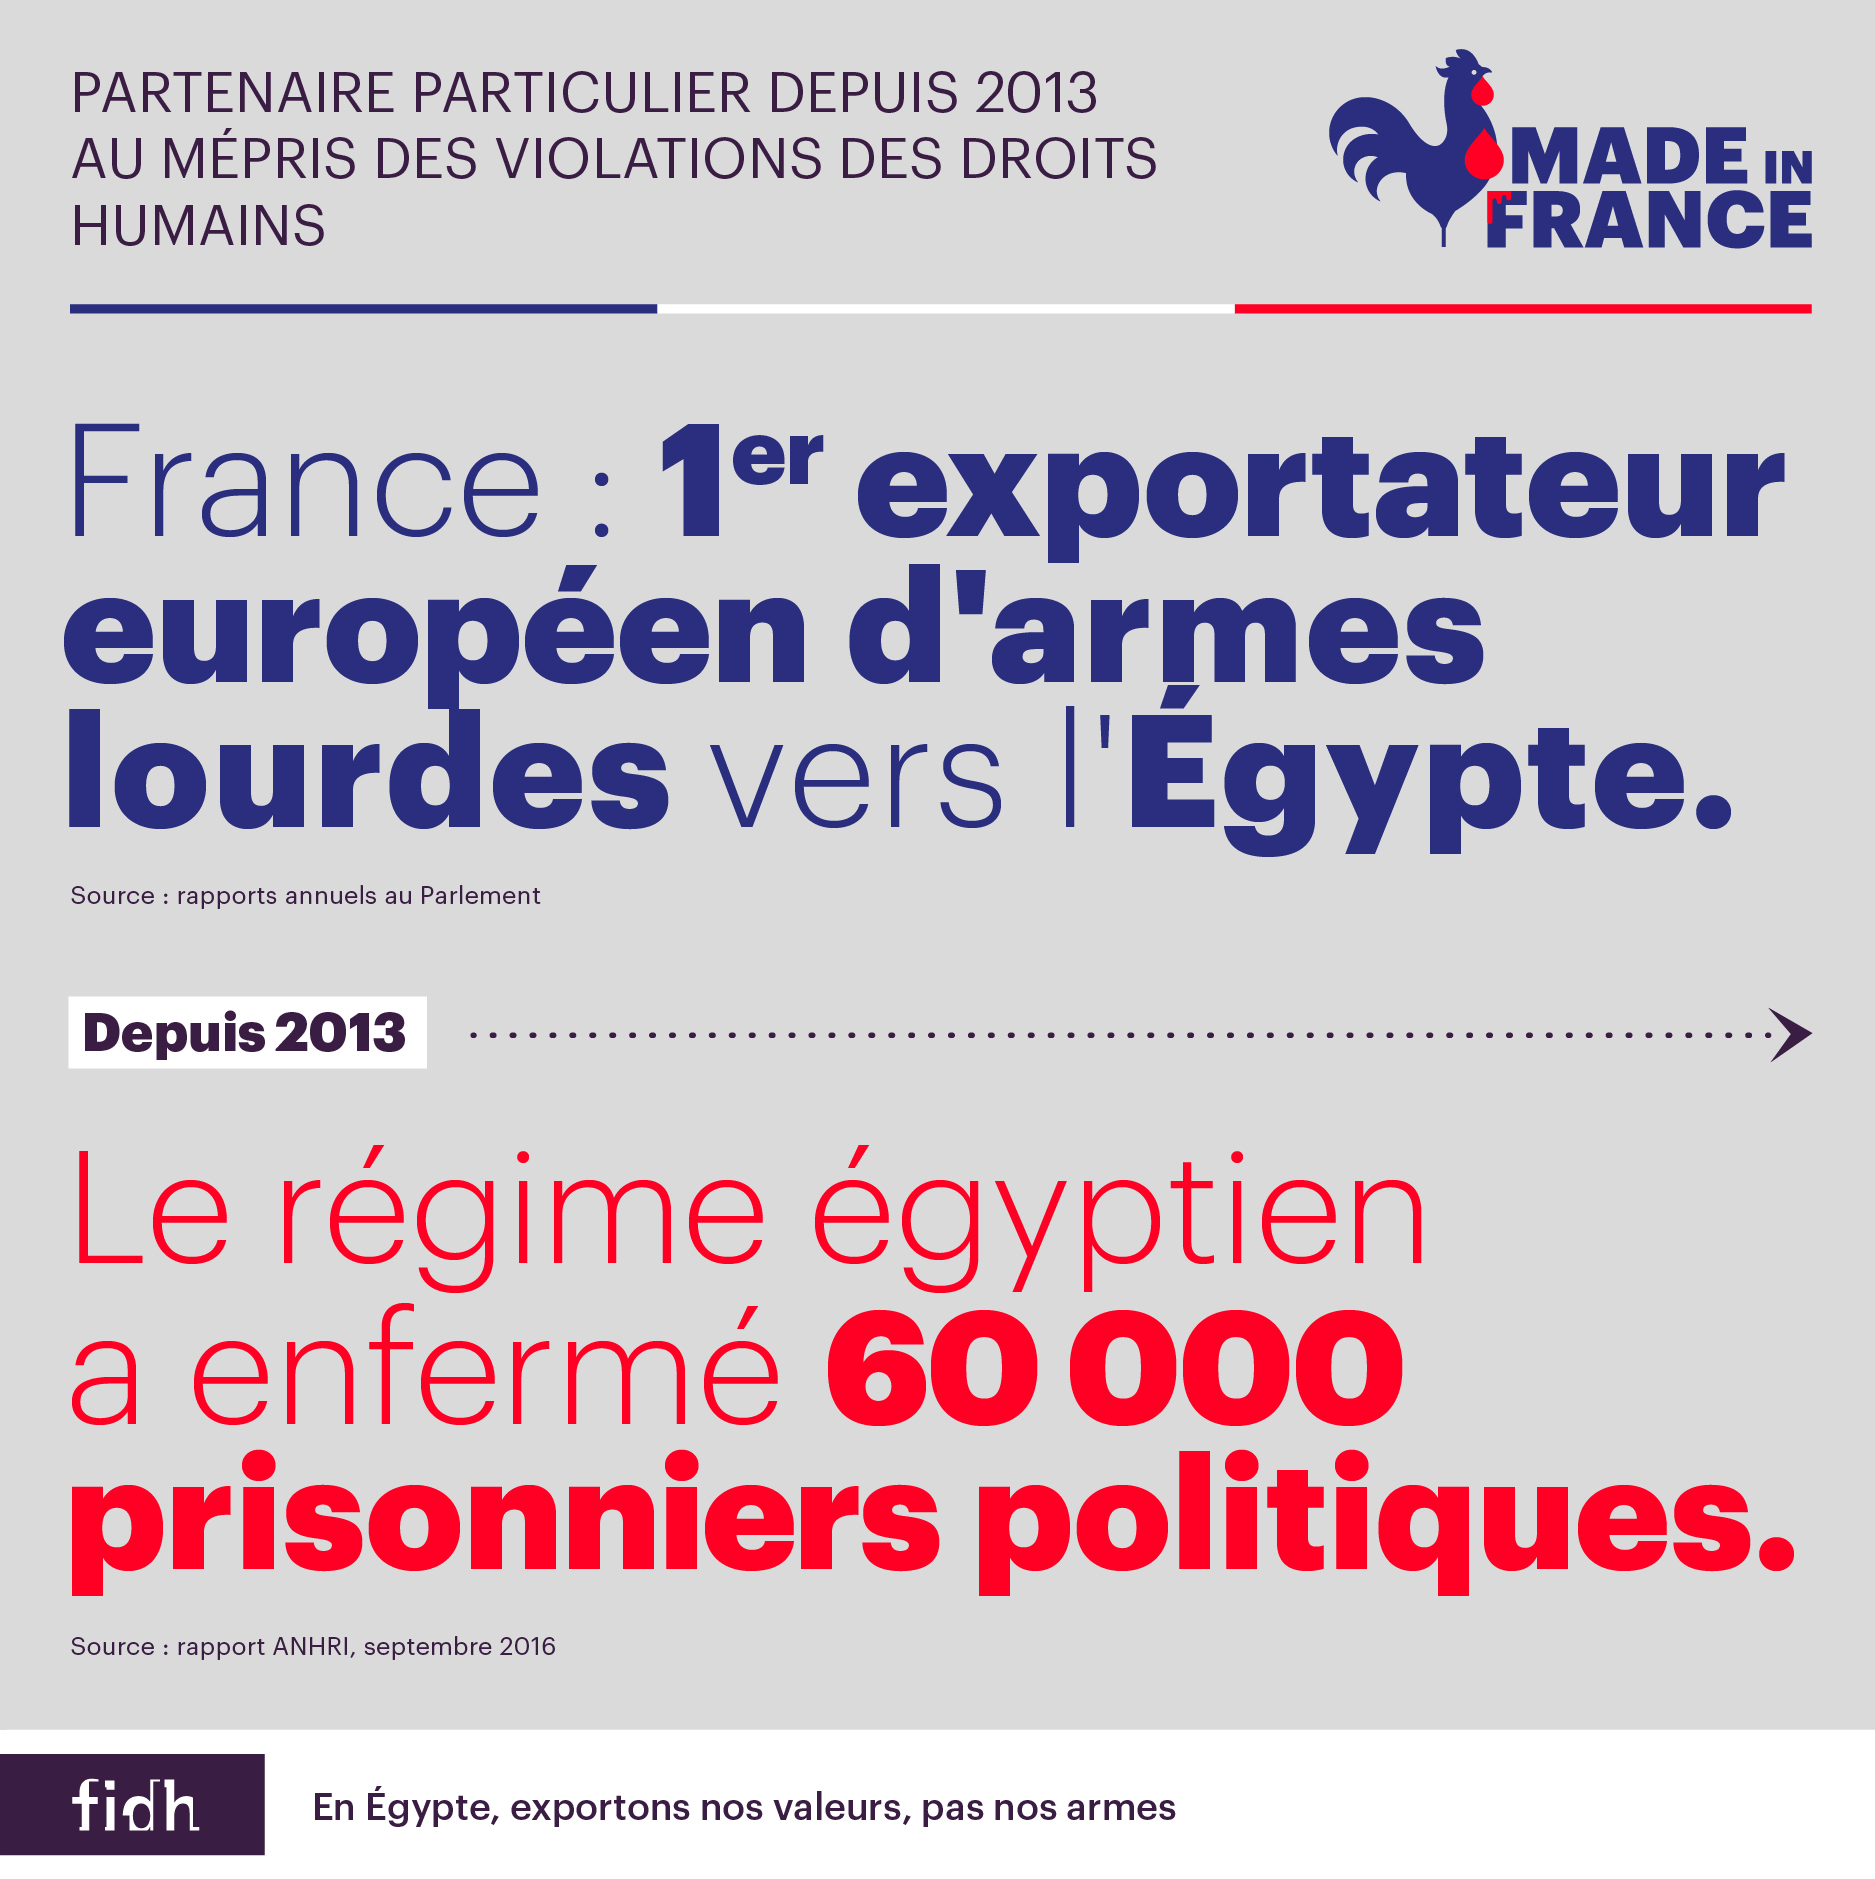 FIDH_MADEINFRANCE_01